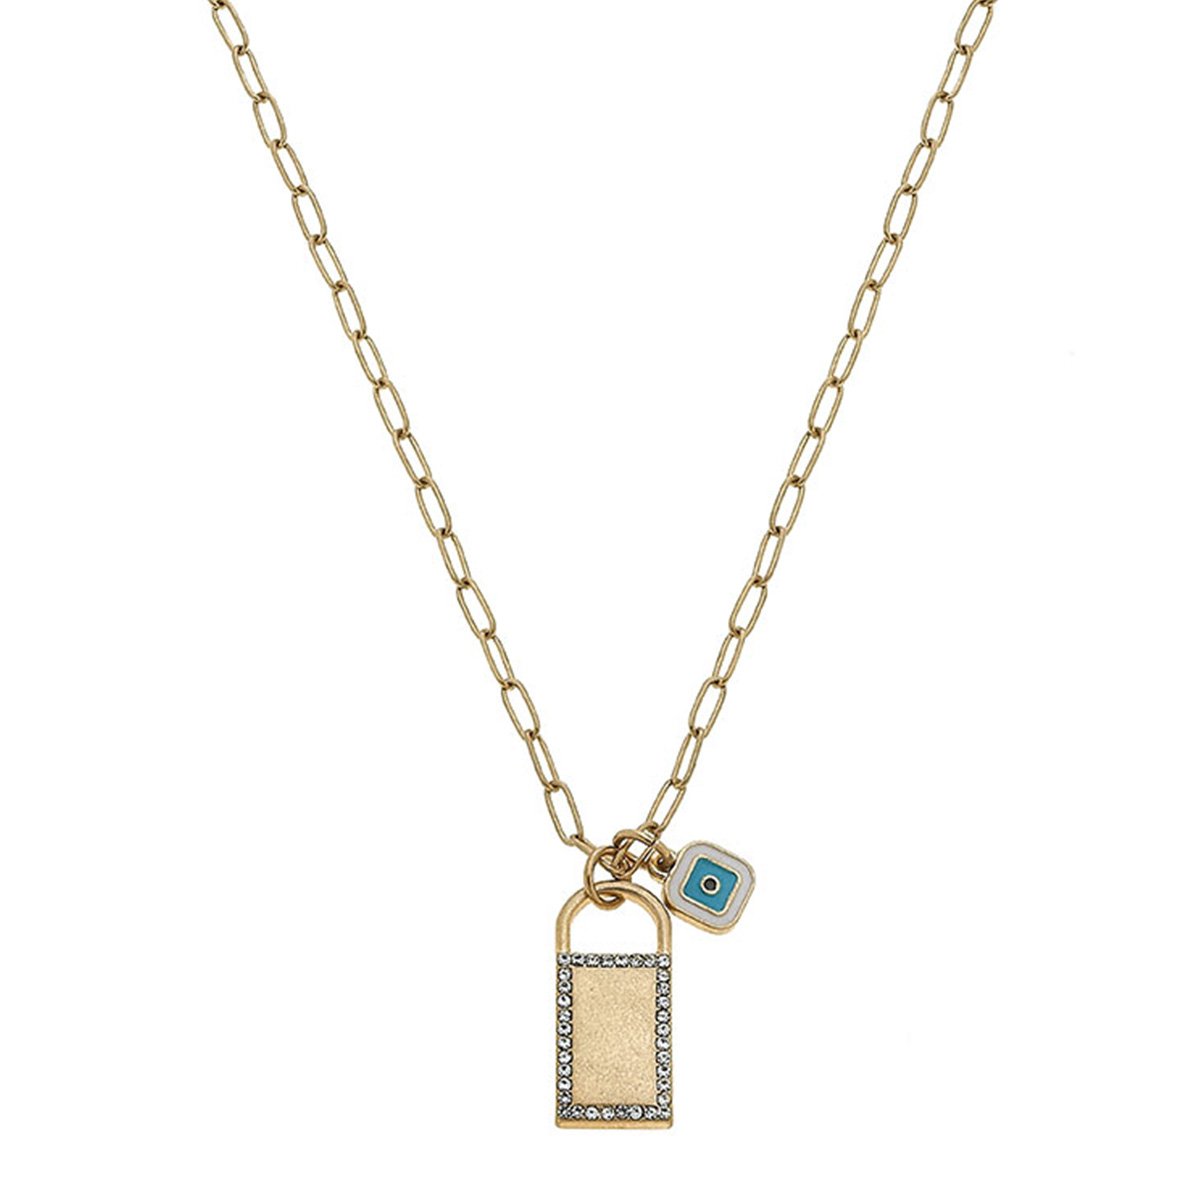 Elena Pavé Padlock Paperclip Chain Necklace in Worn Gold